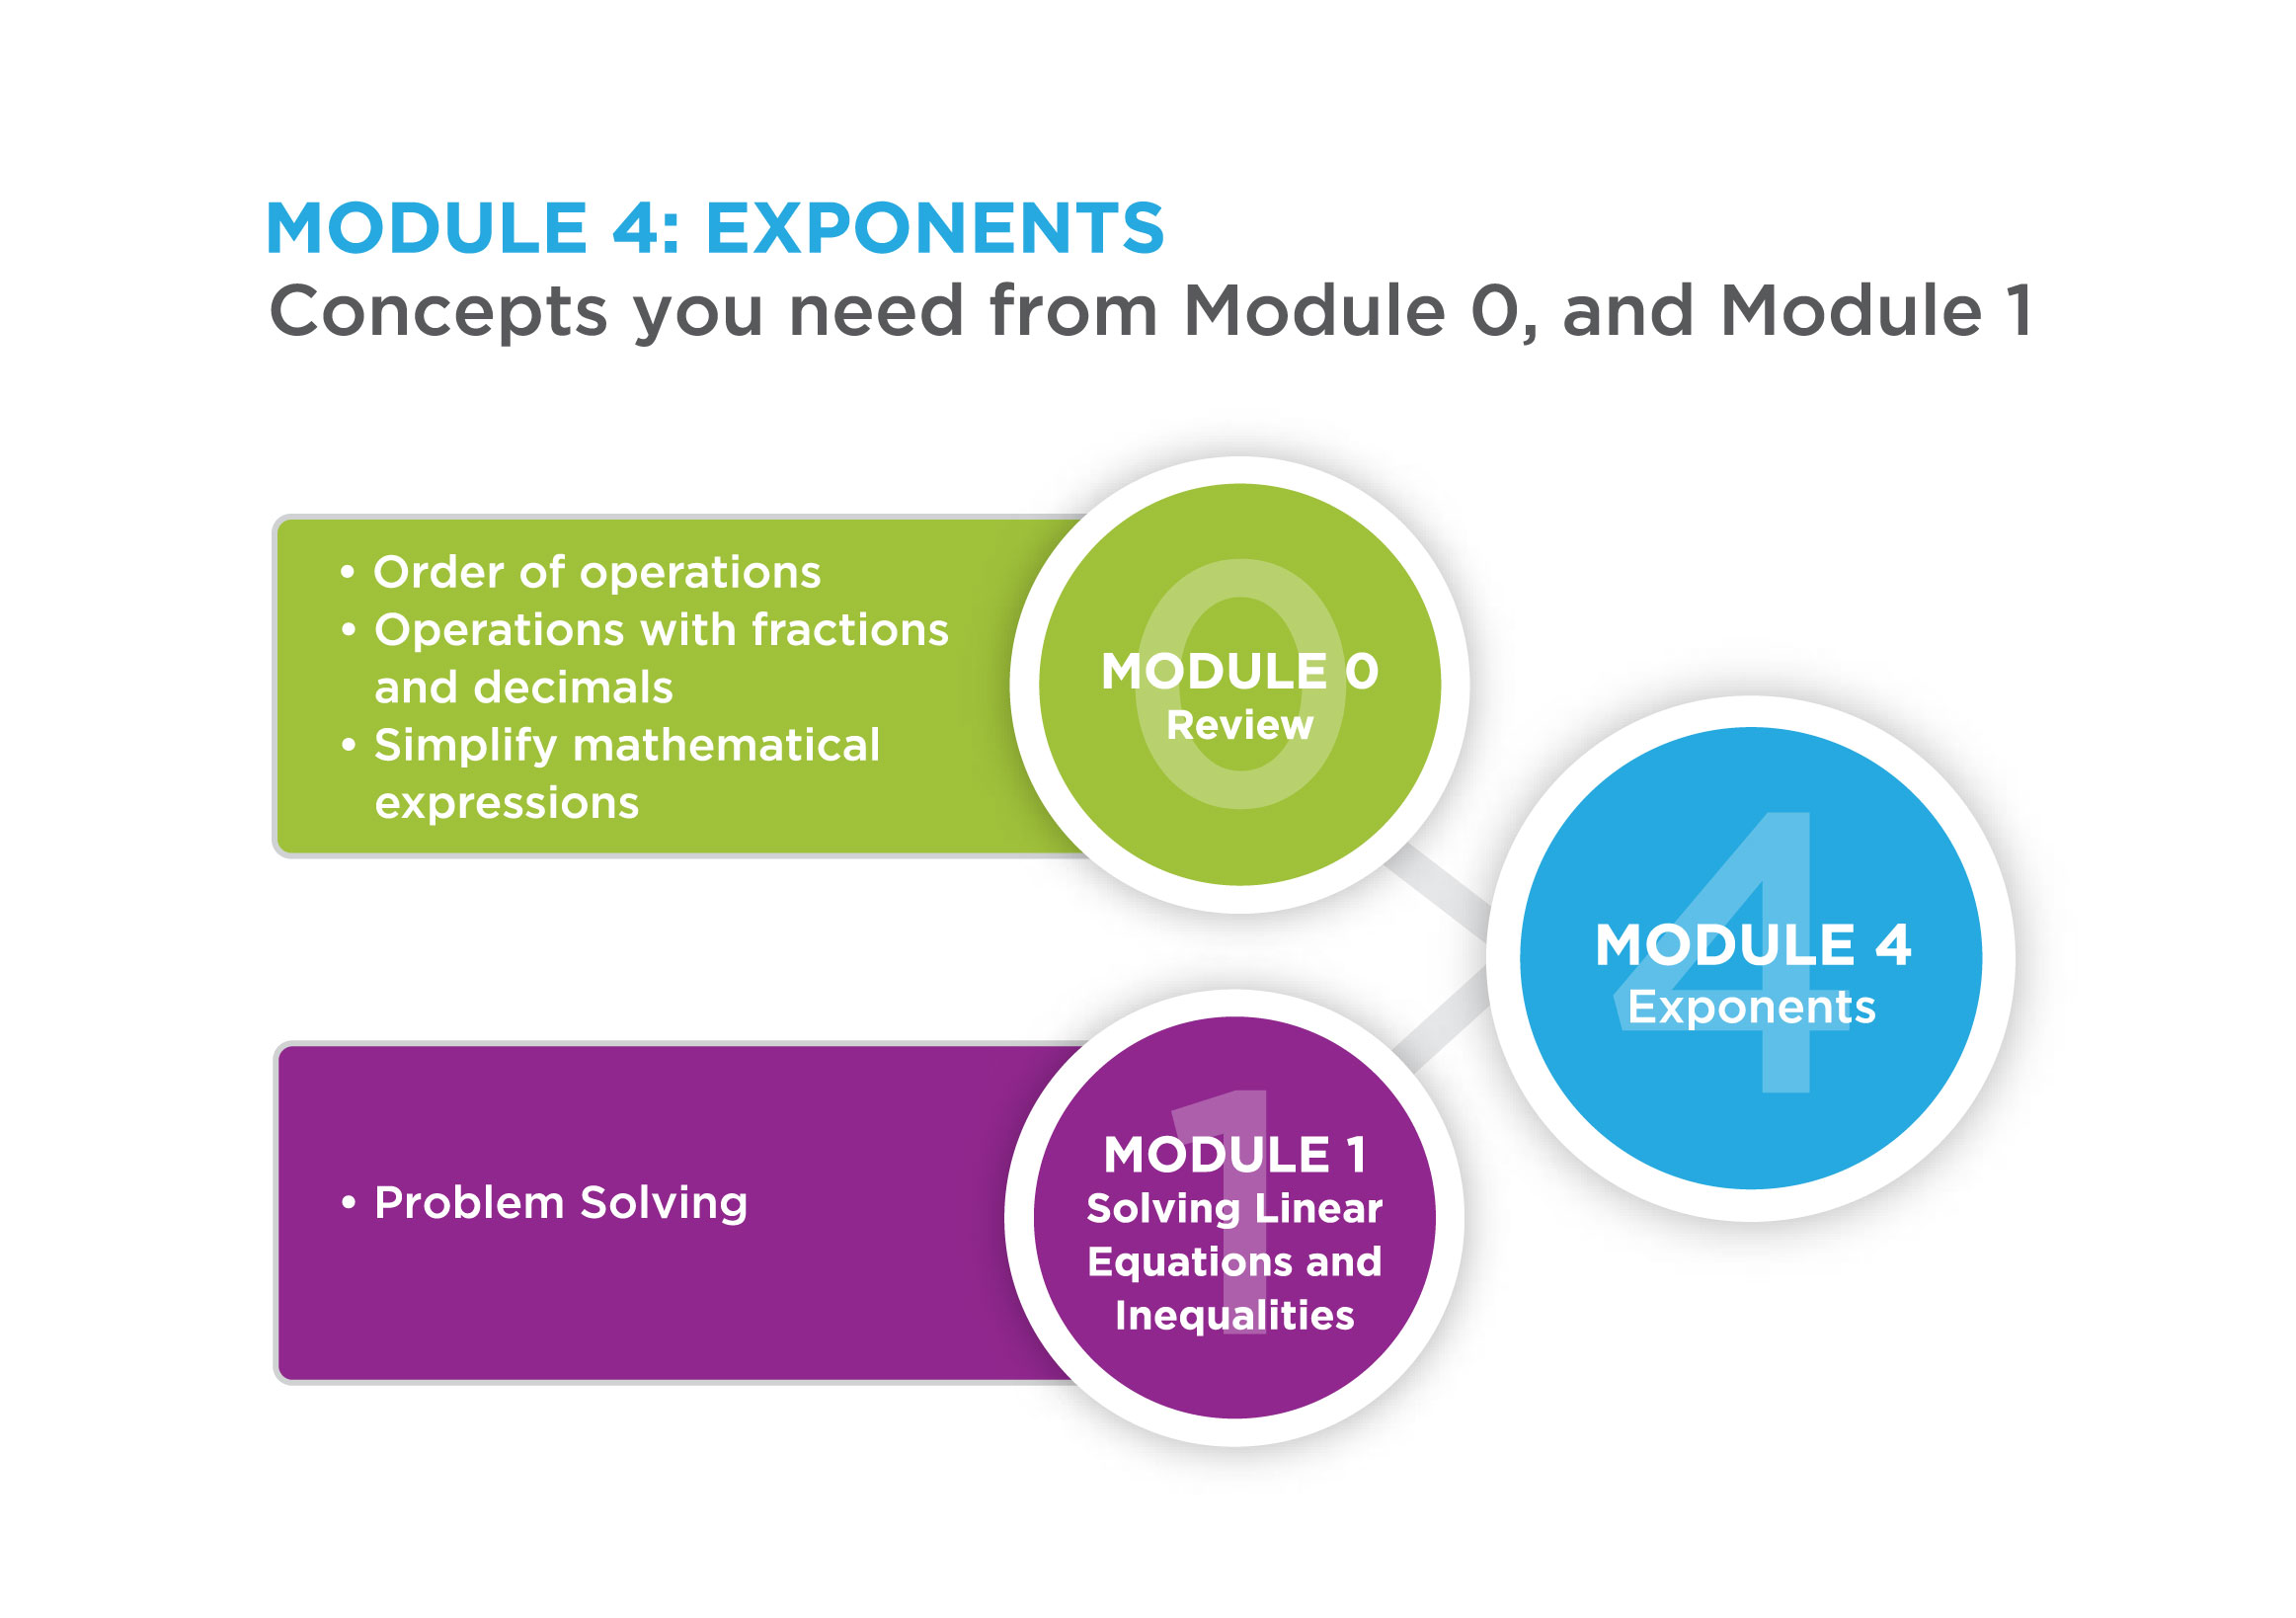 Module 4: Concepts you need from module 0: 1) order of operations. 2) operations with fractions and decimals. 3) Simplify mathematical expressions. Concepts you need from module 1: problem solving.